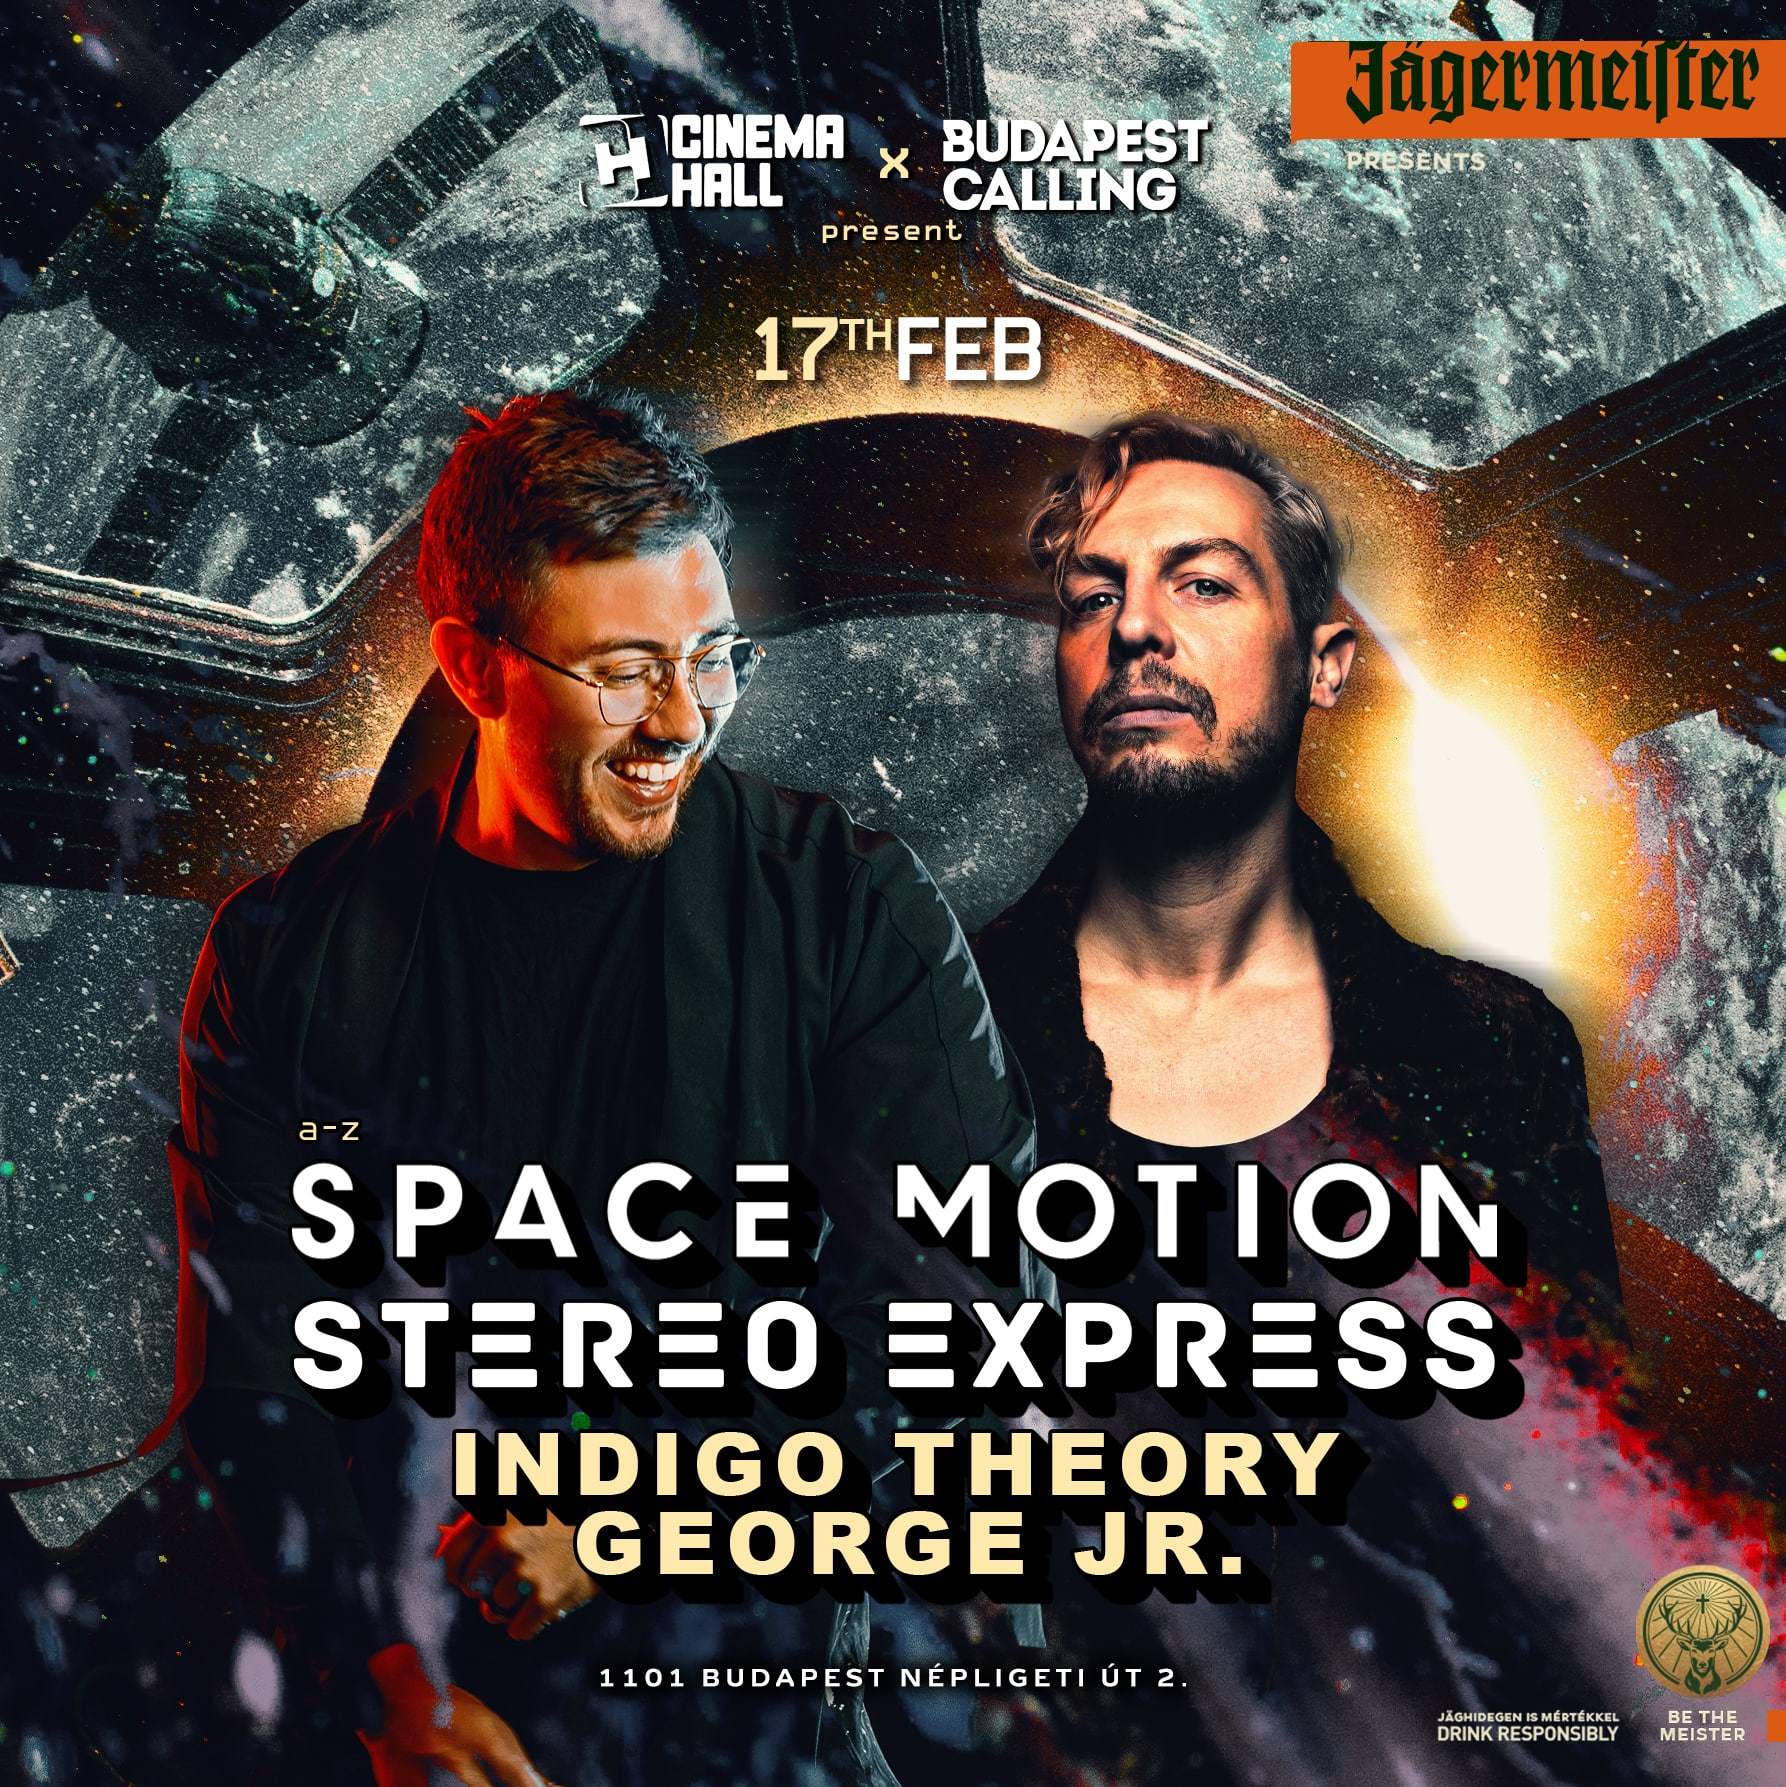 Space Motion, Stereo Express - フライヤー表